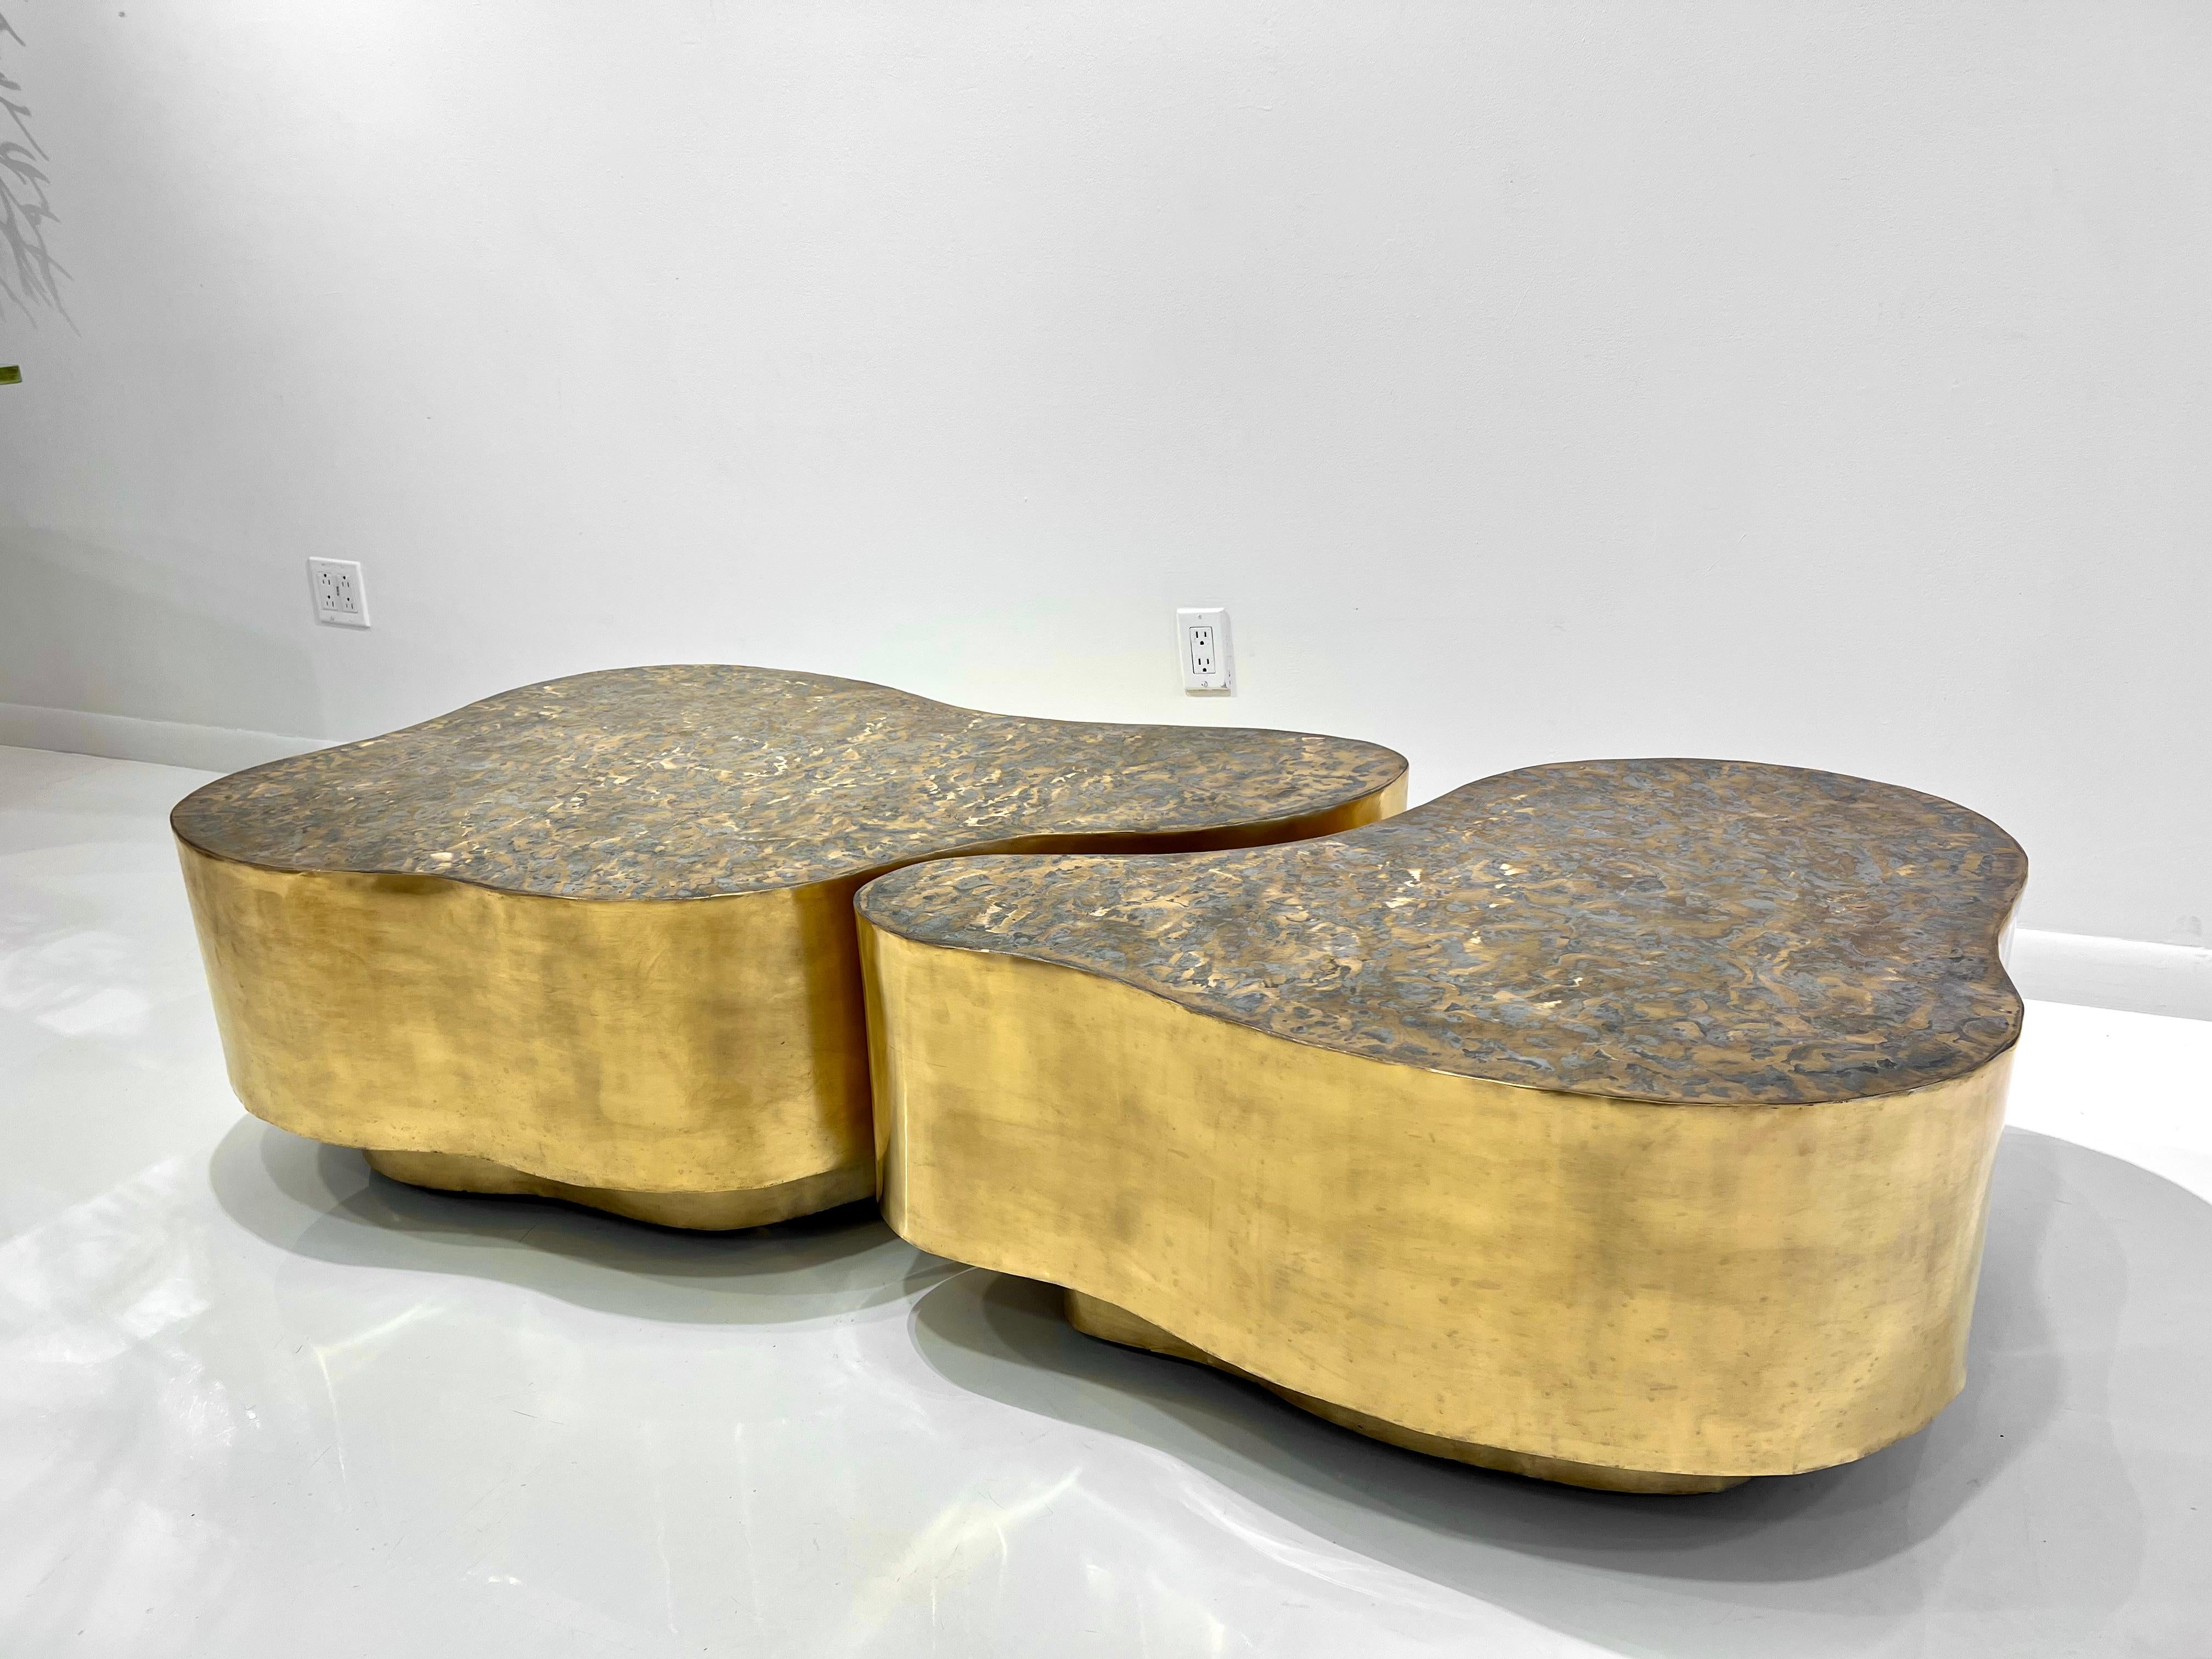 Pair of rare 1960's Bronze Biomorphic Coffee Tables by Silas Seandel, patinated with brushed textured top.
Two part coffee table. Each part is on hidden casters and can be moved and separated with ease. Signed on the top edge of the smaller